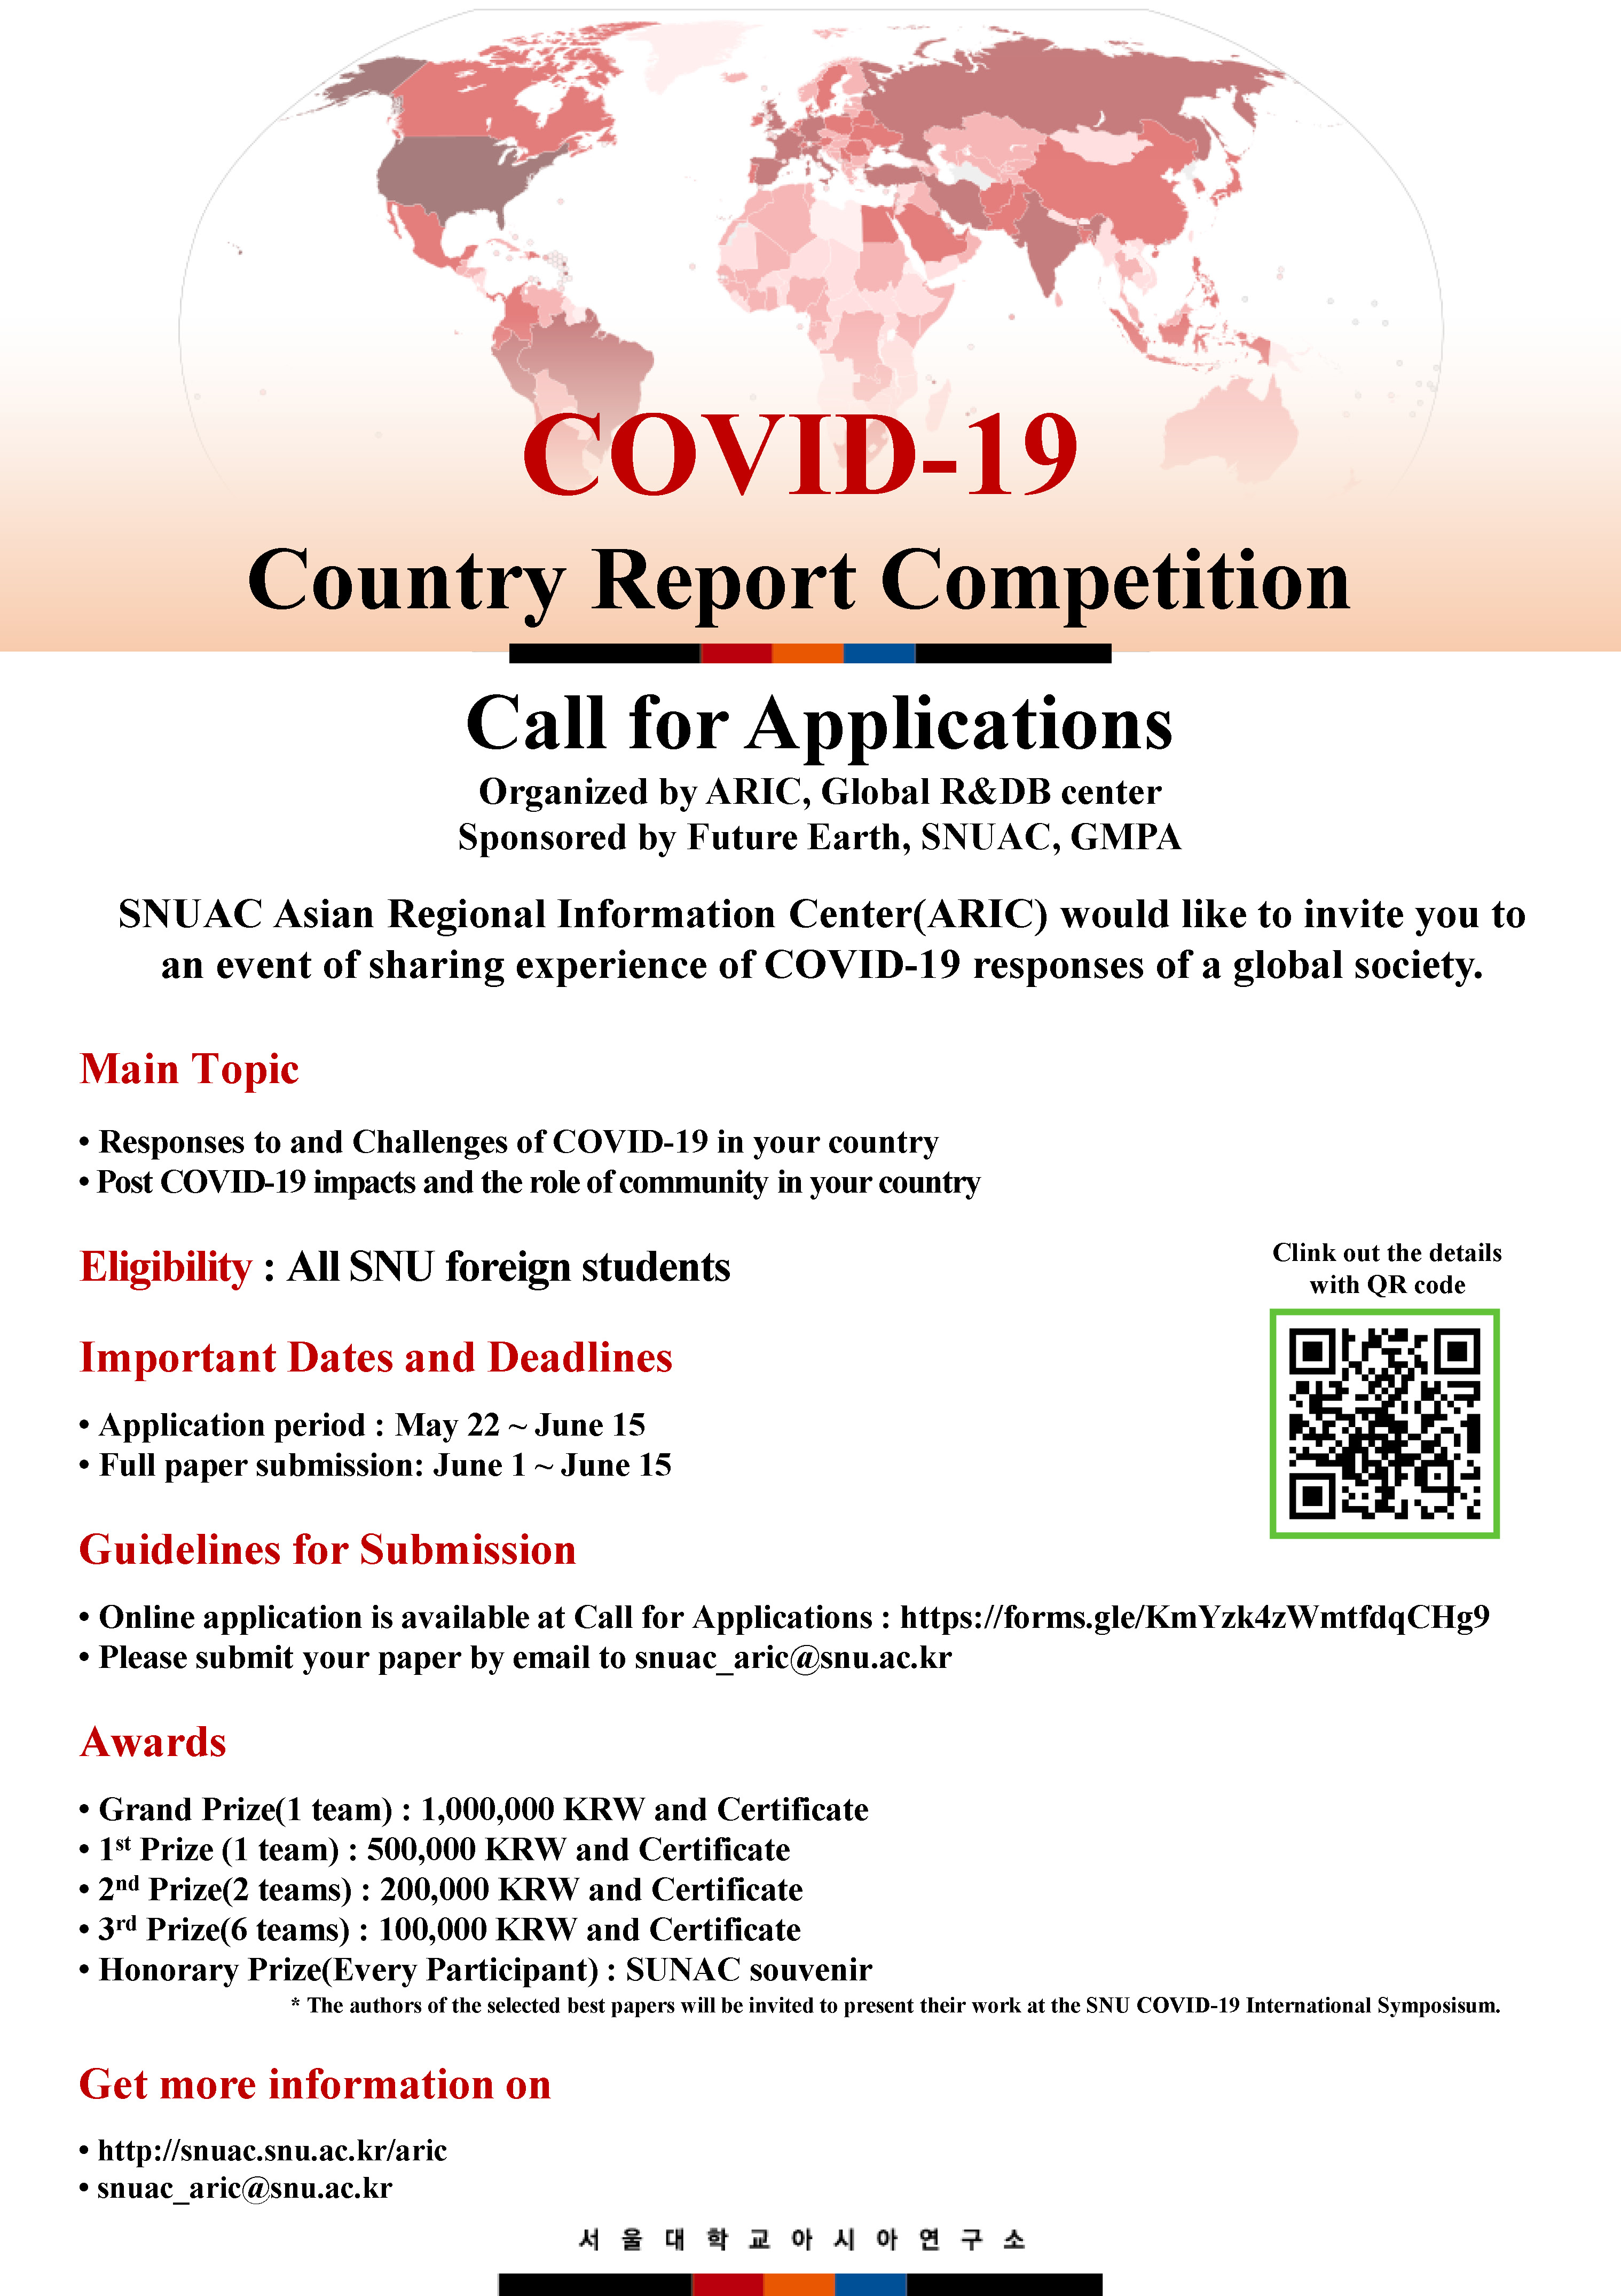 COVID-19 Country Report Competition: Call for Applications